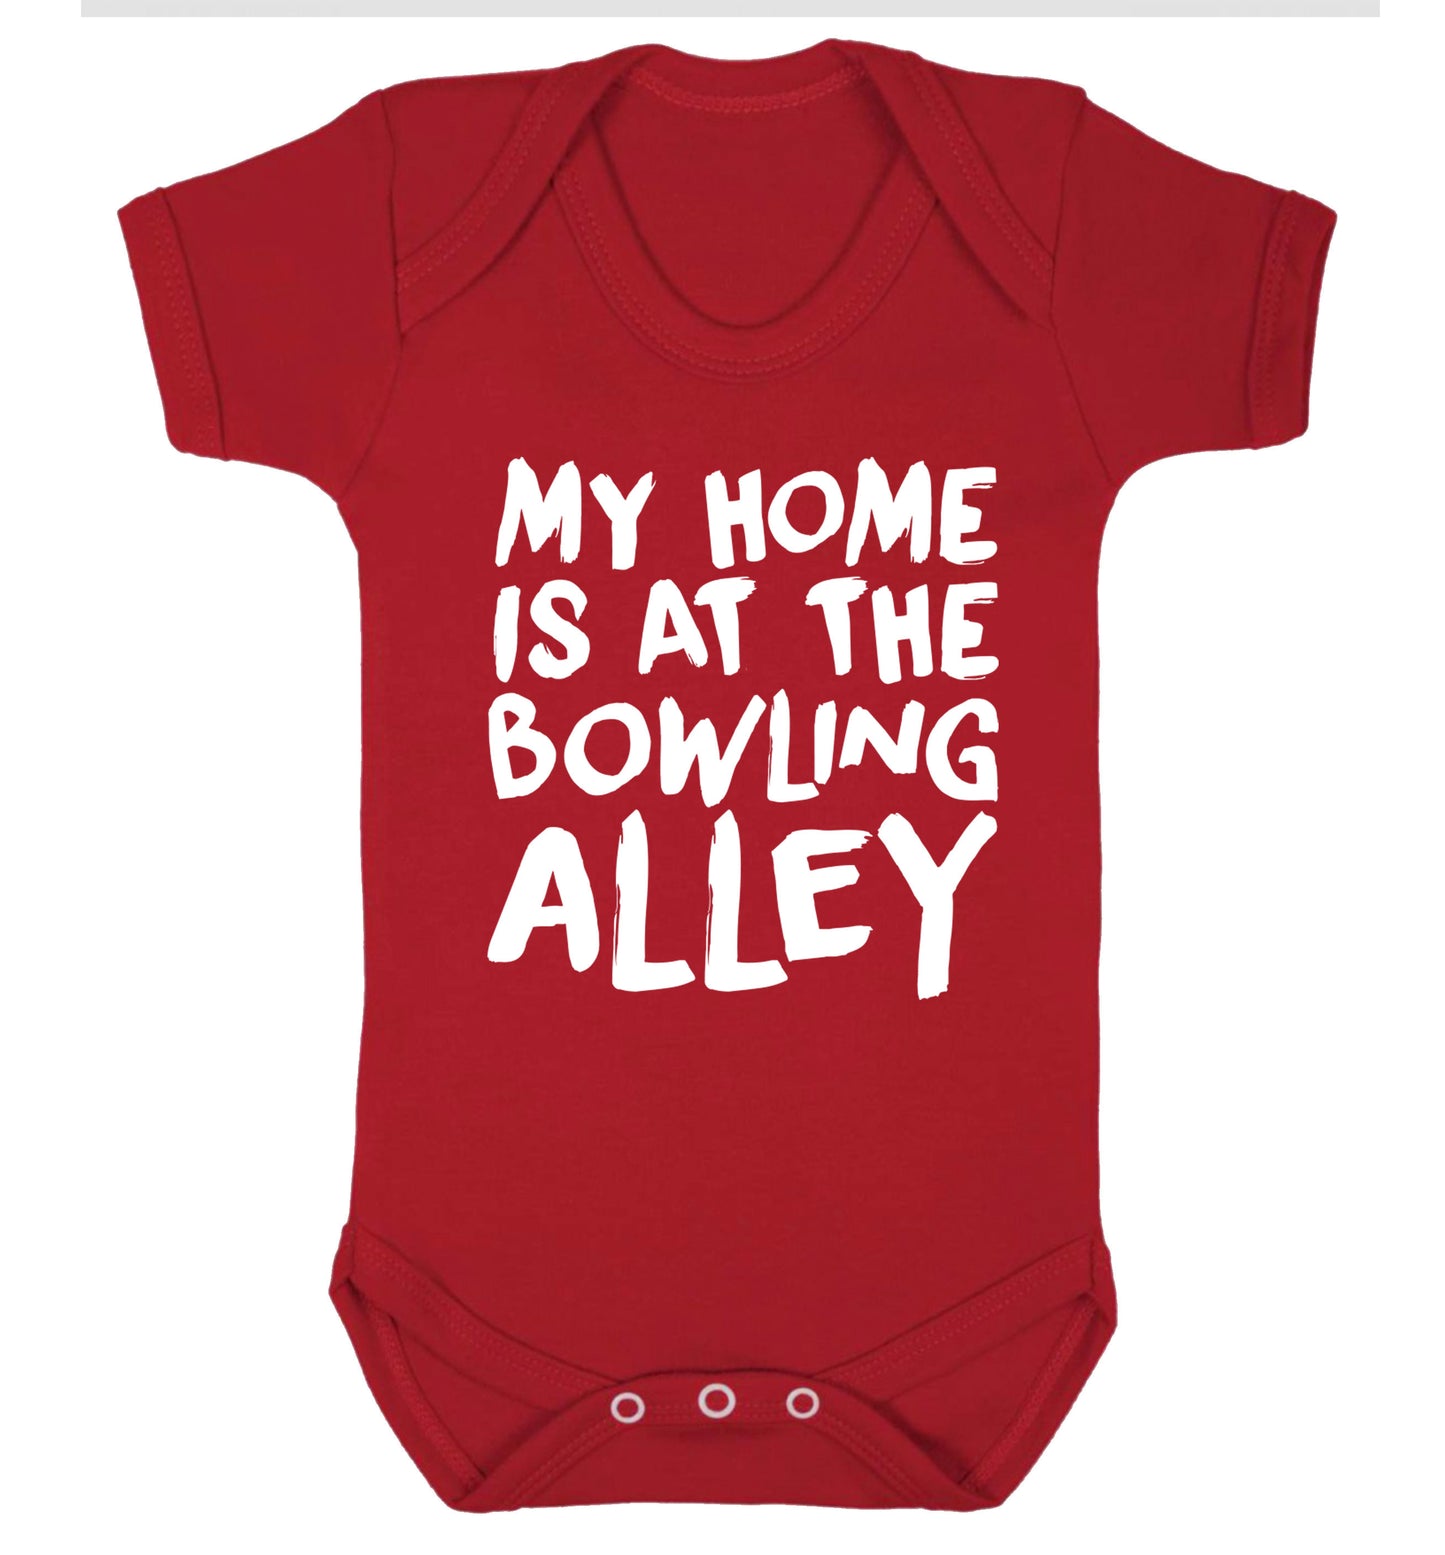 My home is at the bowling alley Baby Vest red 18-24 months